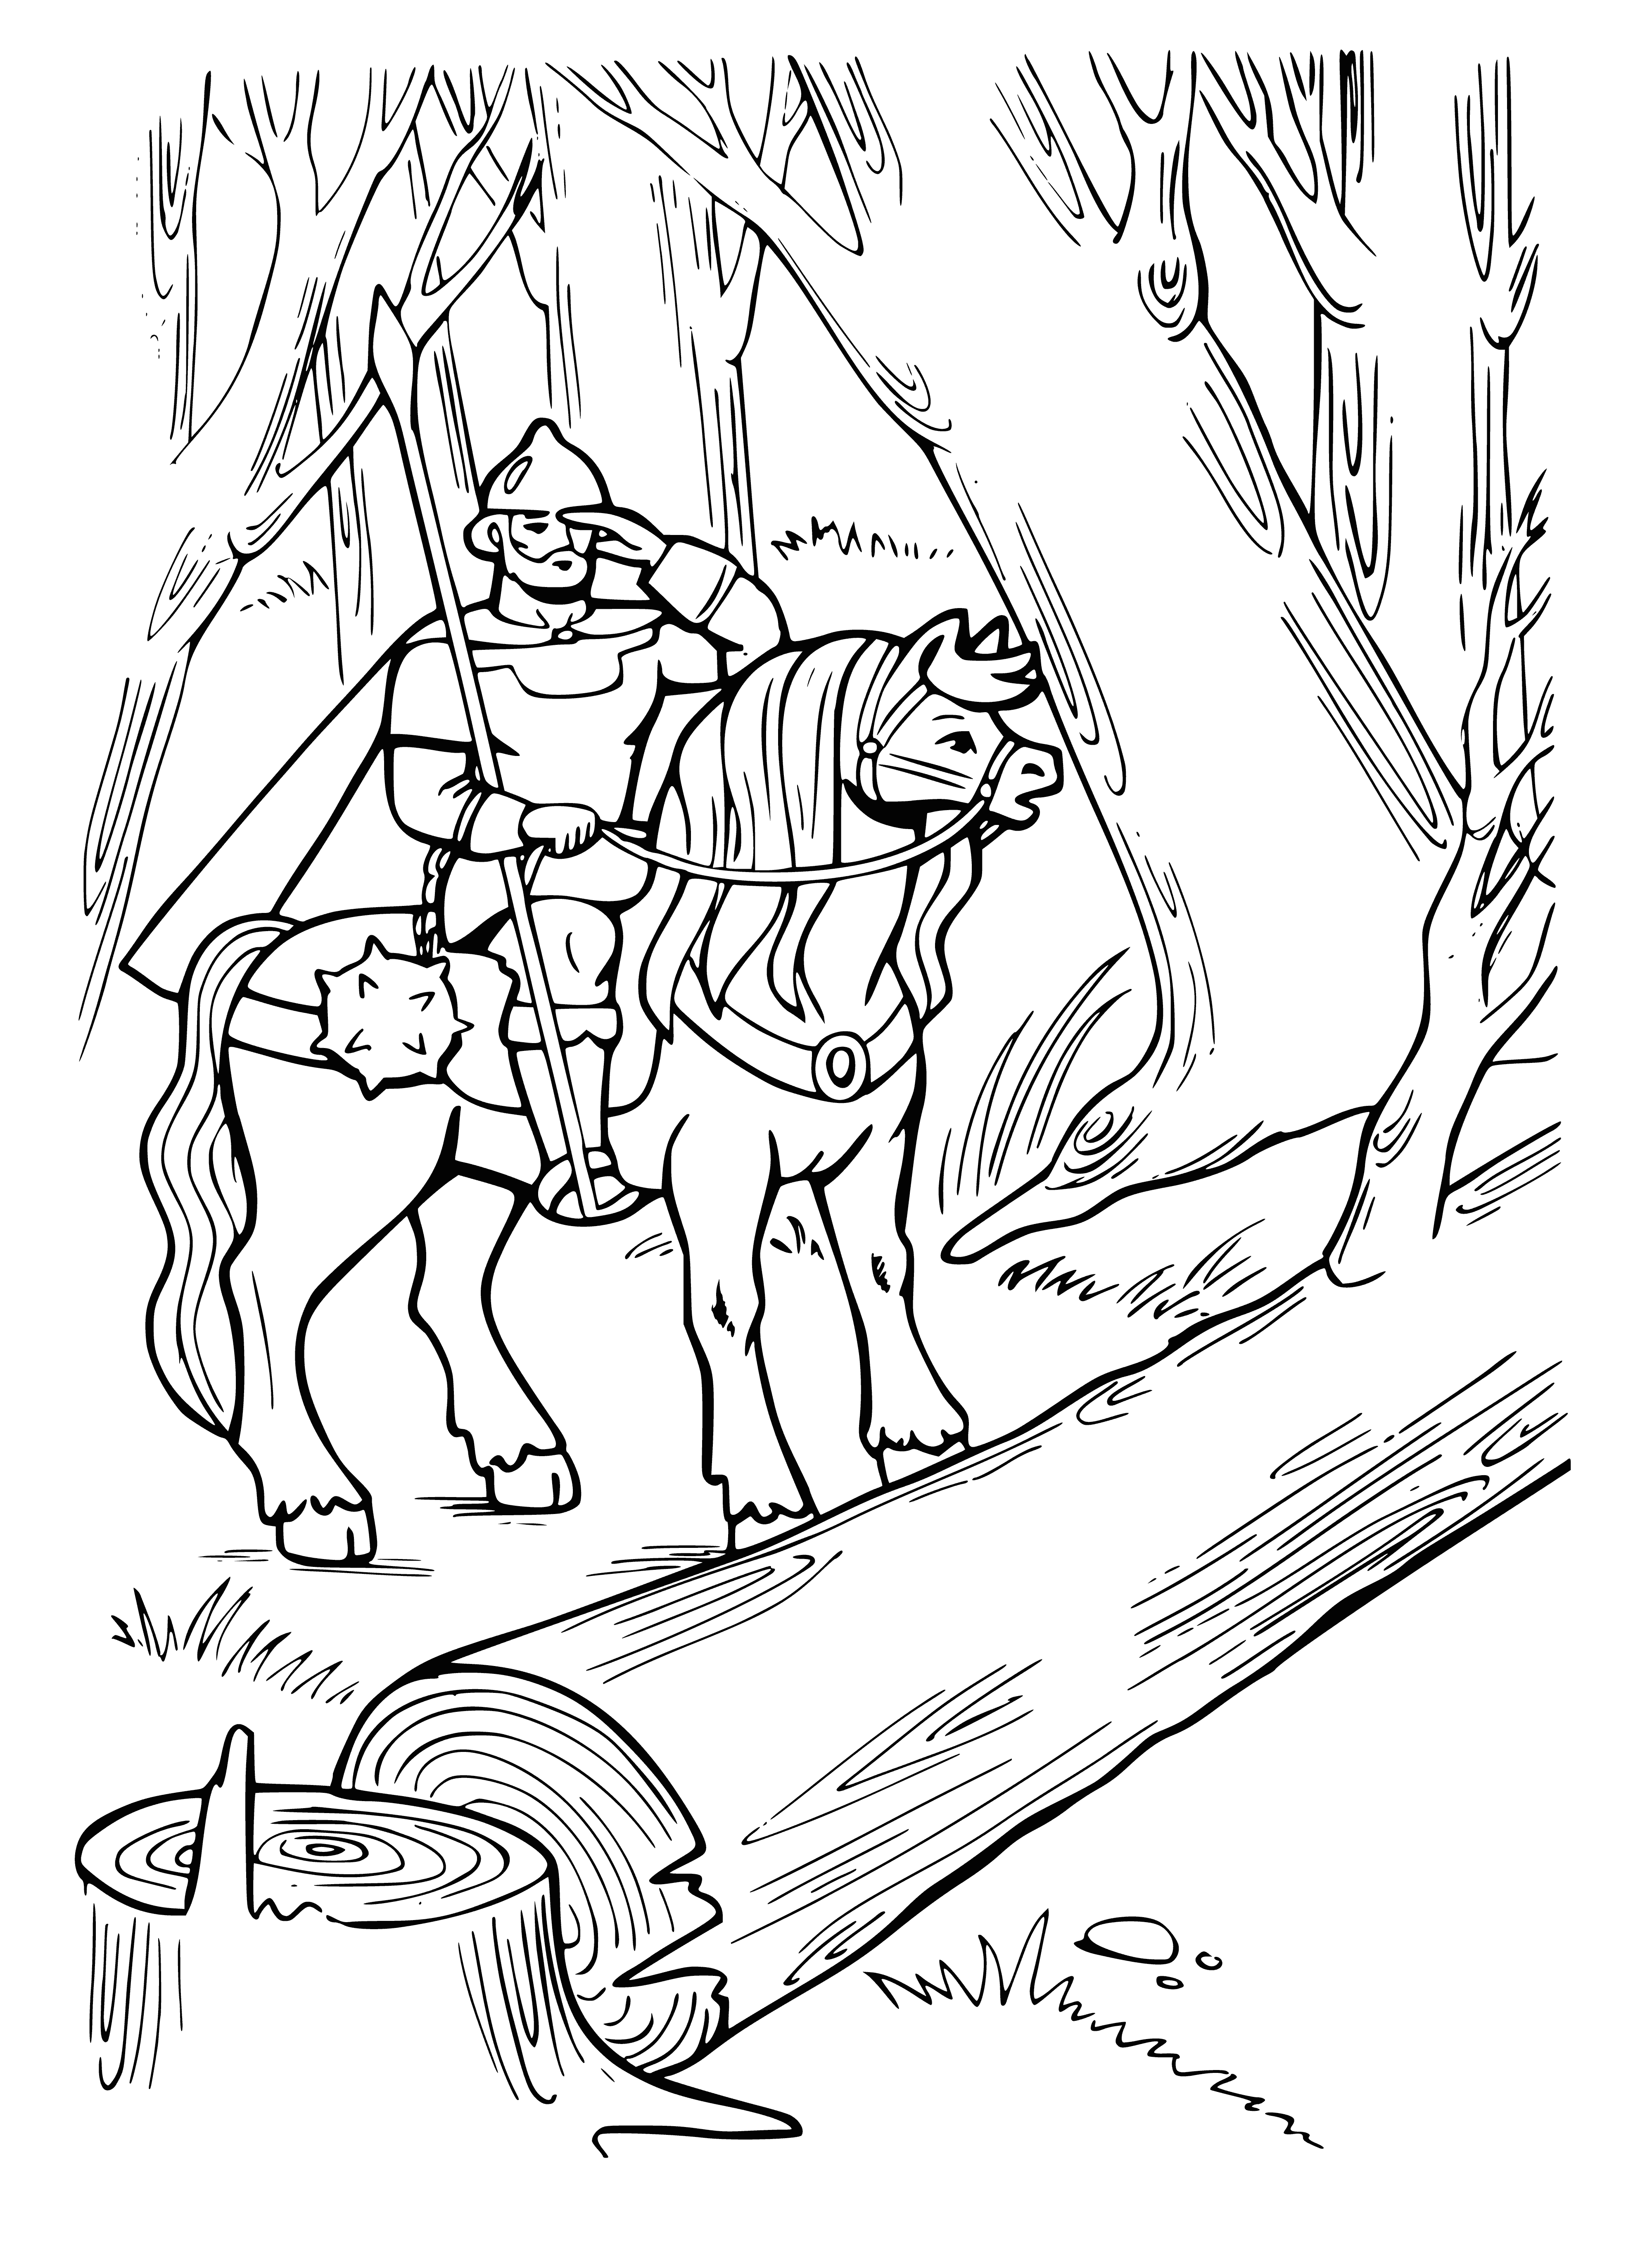 A tree felled coloring page